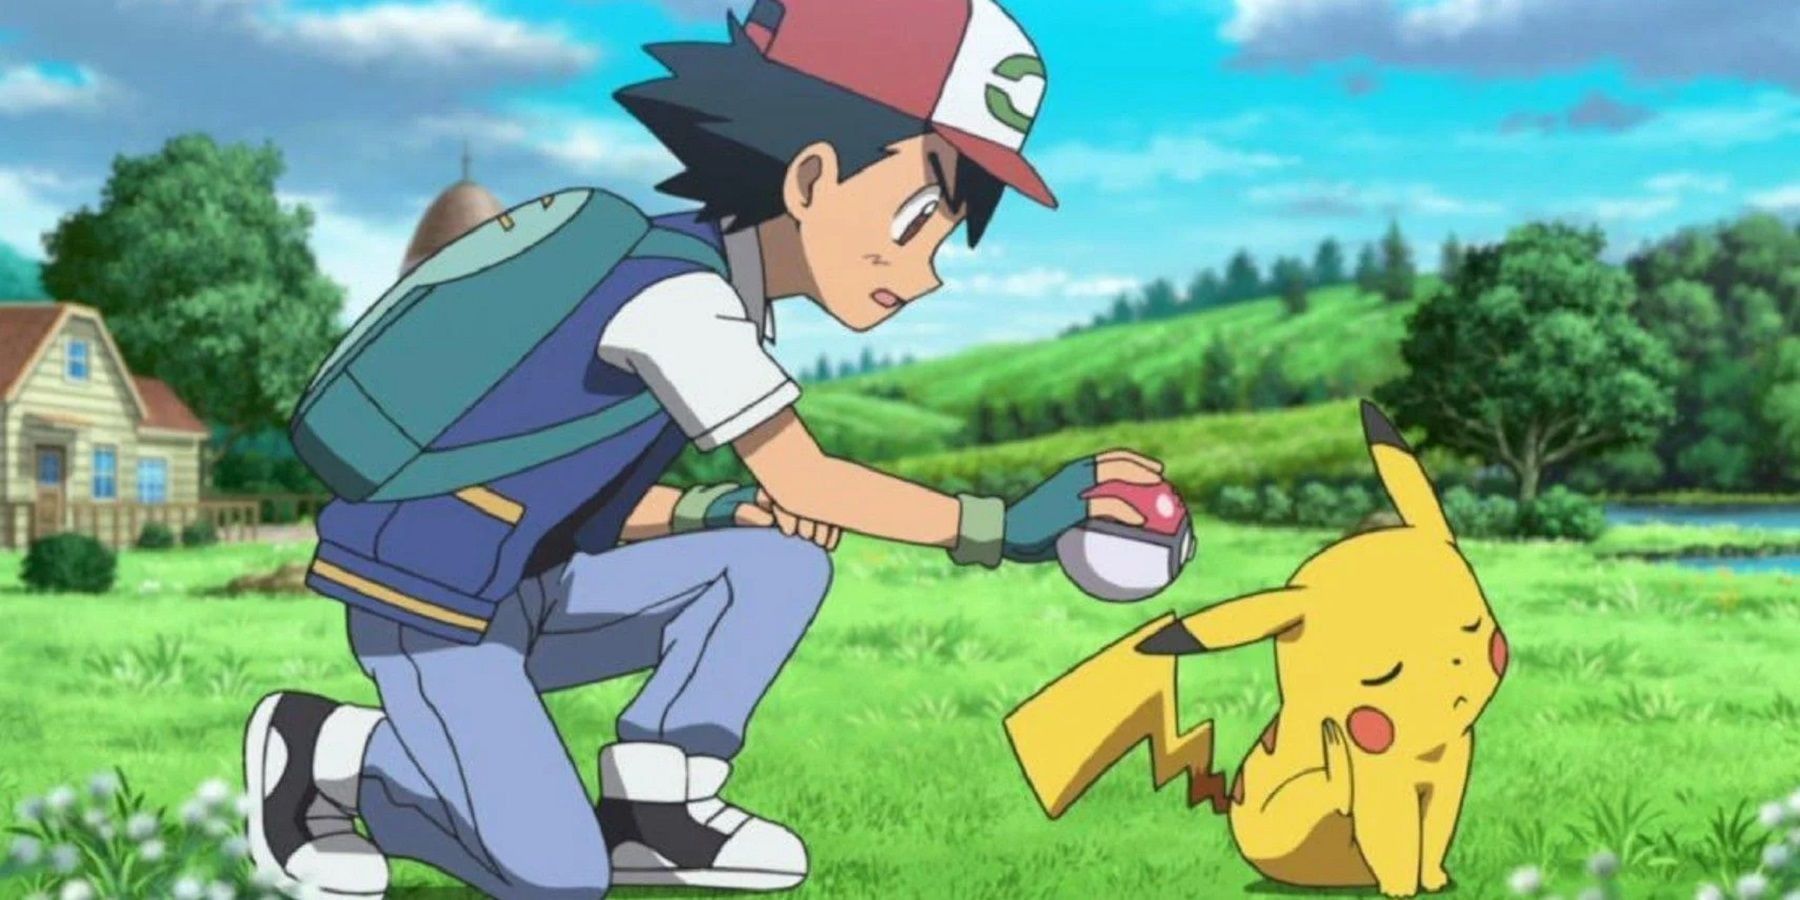 Ash bends towards Pikachu, Pokeball in hand while pikachu turns away and scratches himself, ignoring Ash